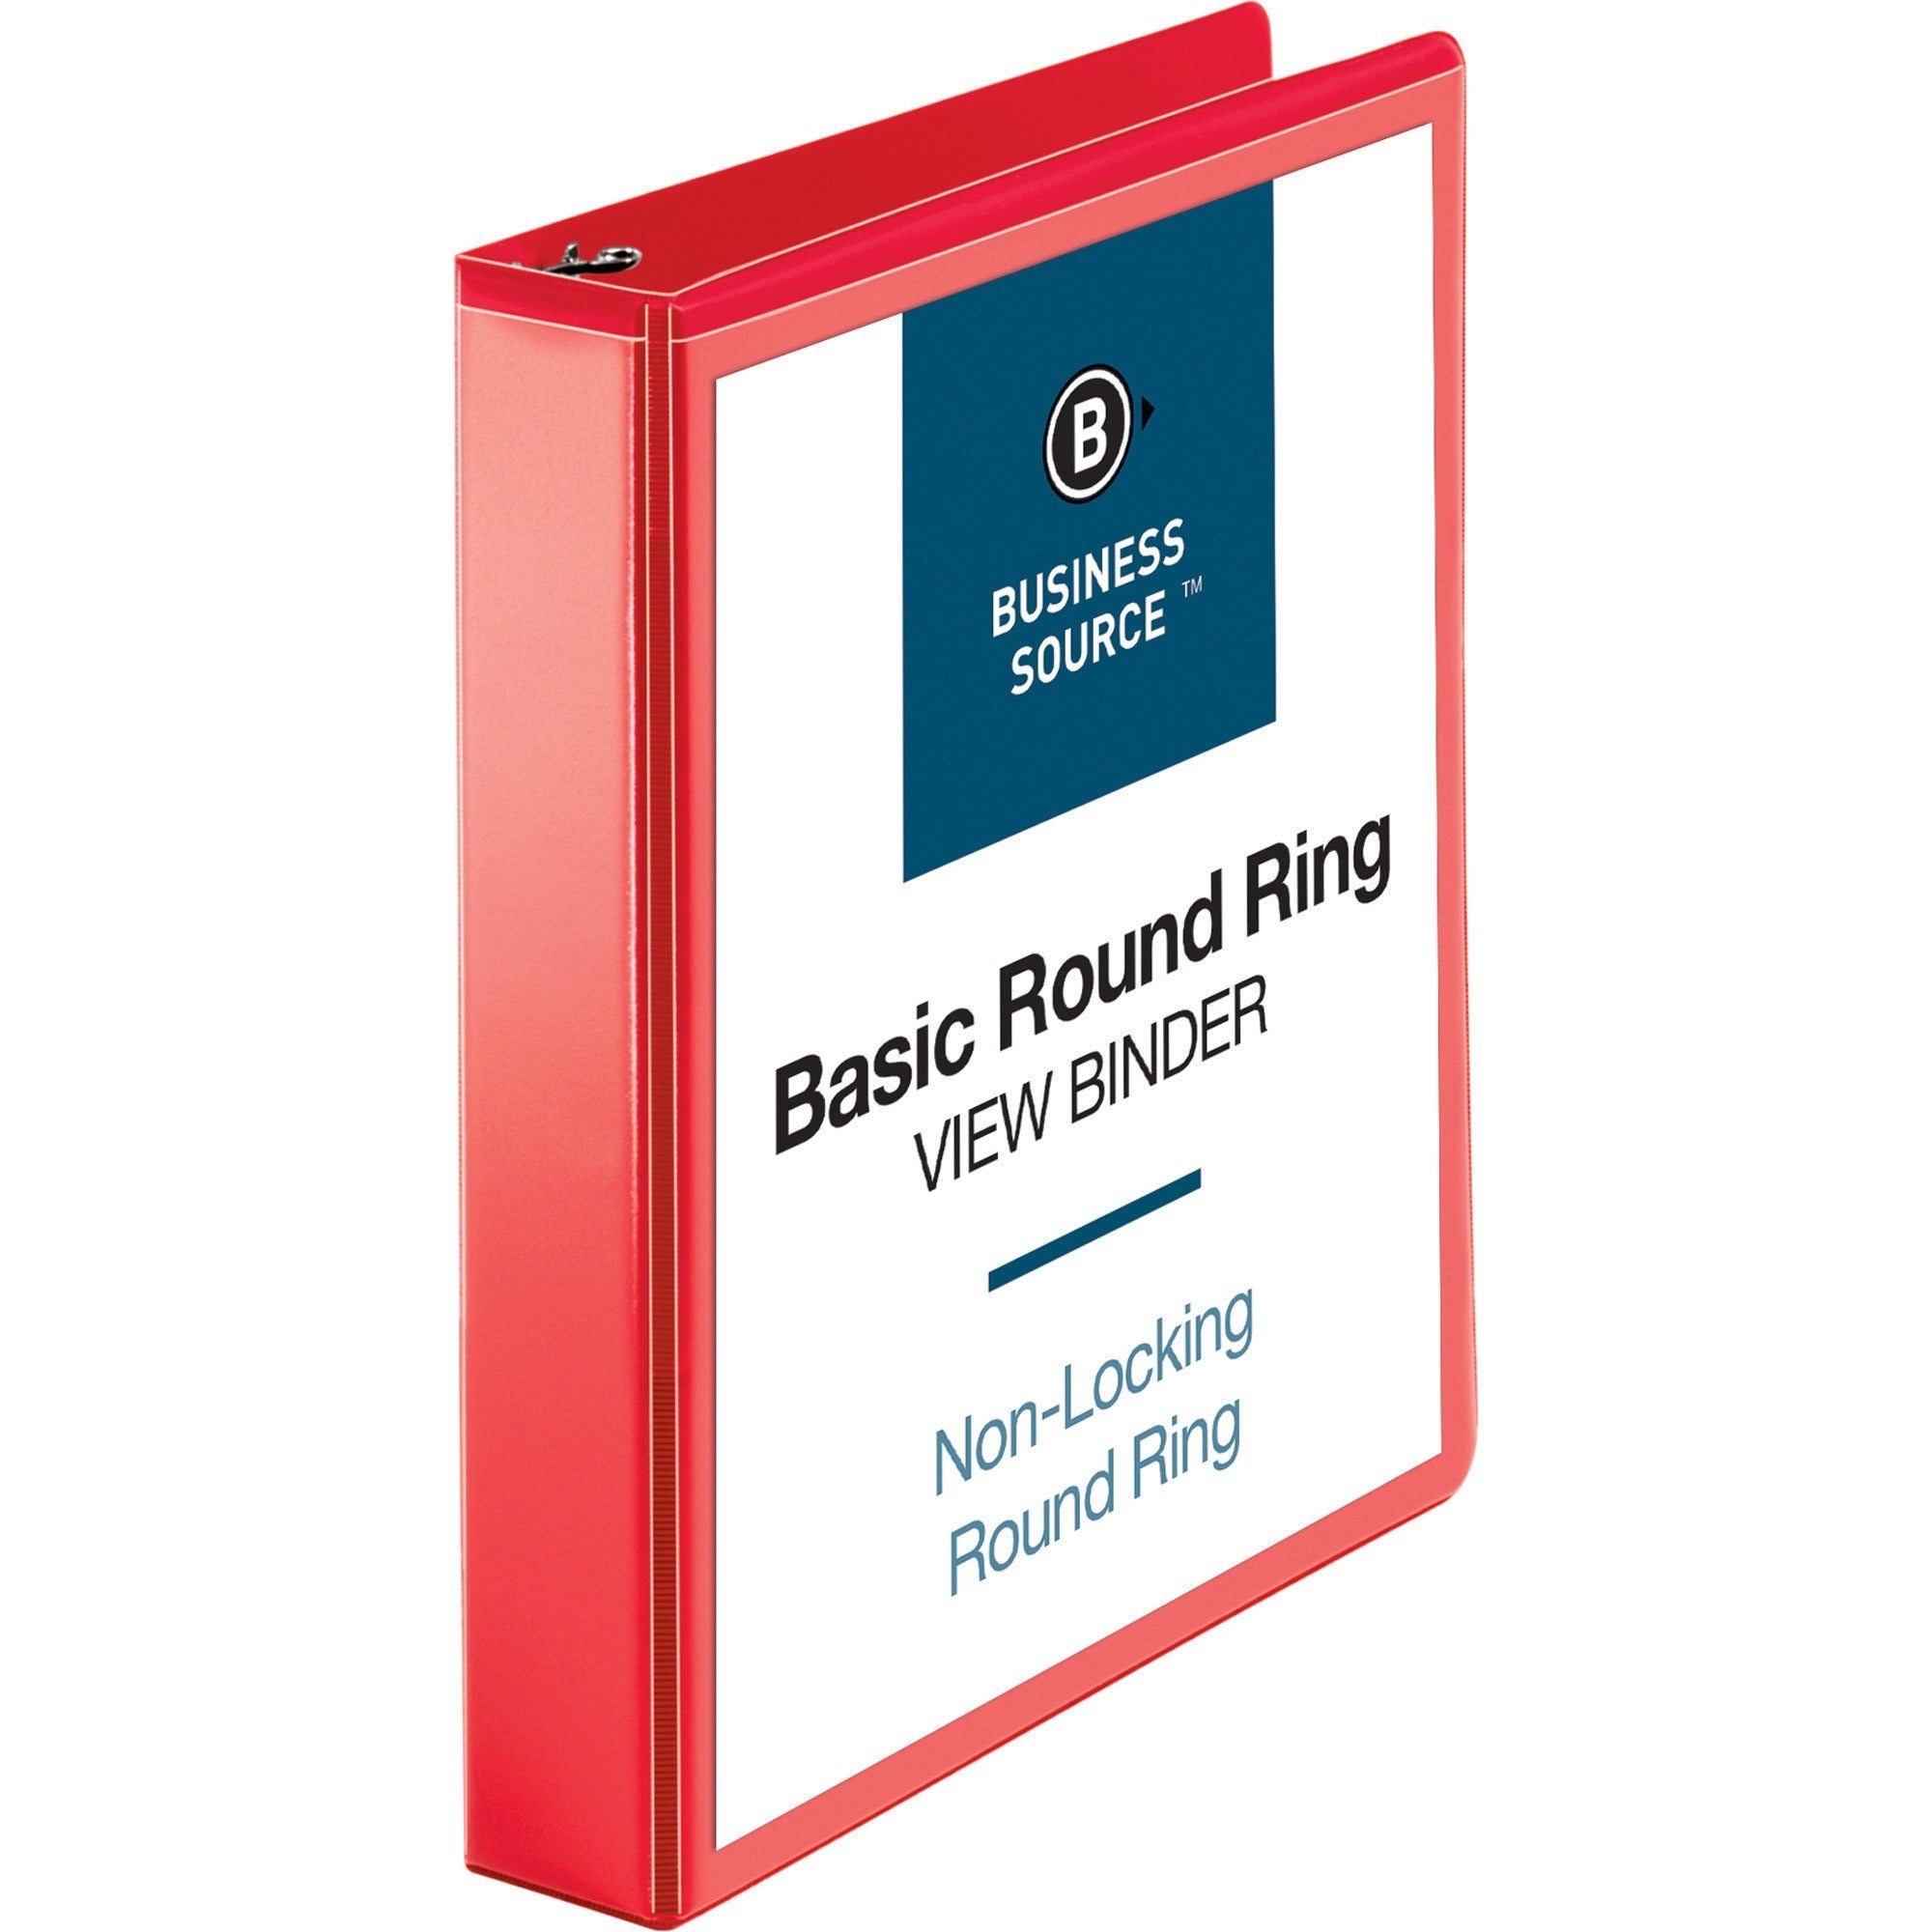 business-source-round-ring-binder-1-1-2-binder-capacity-round-ring-fasteners-2-internal-pockets-red-clear-overlay-labeling-area-1-each_bsn09967 - 1